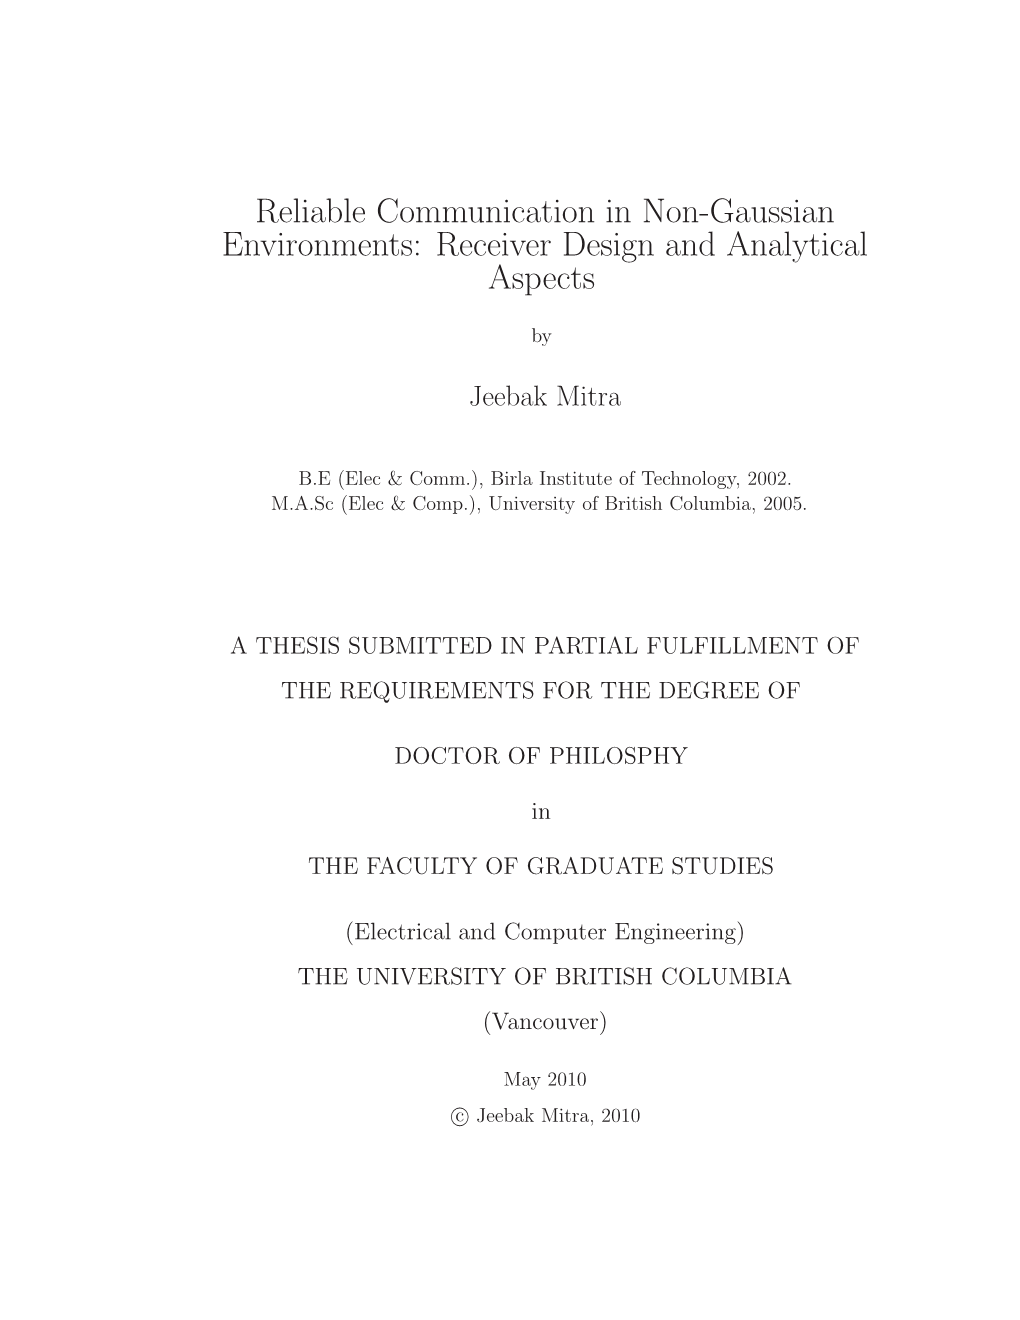 Reliable Communication in Non-Gaussian Environments: Receiver Design and Analytical Aspects